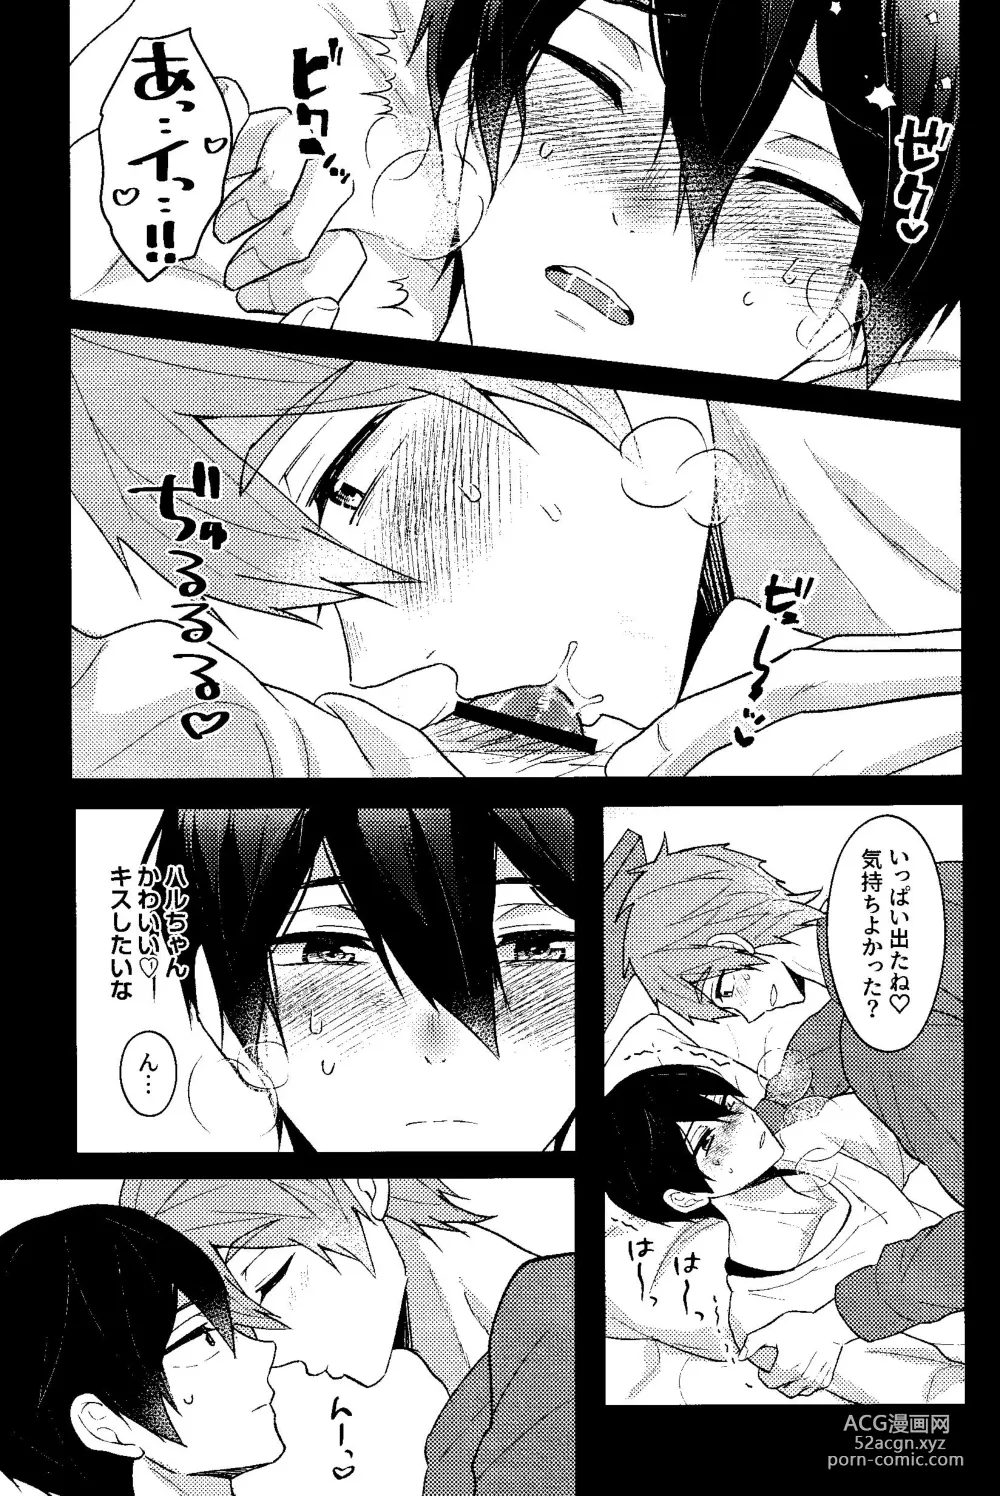 Page 13 of doujinshi My everything